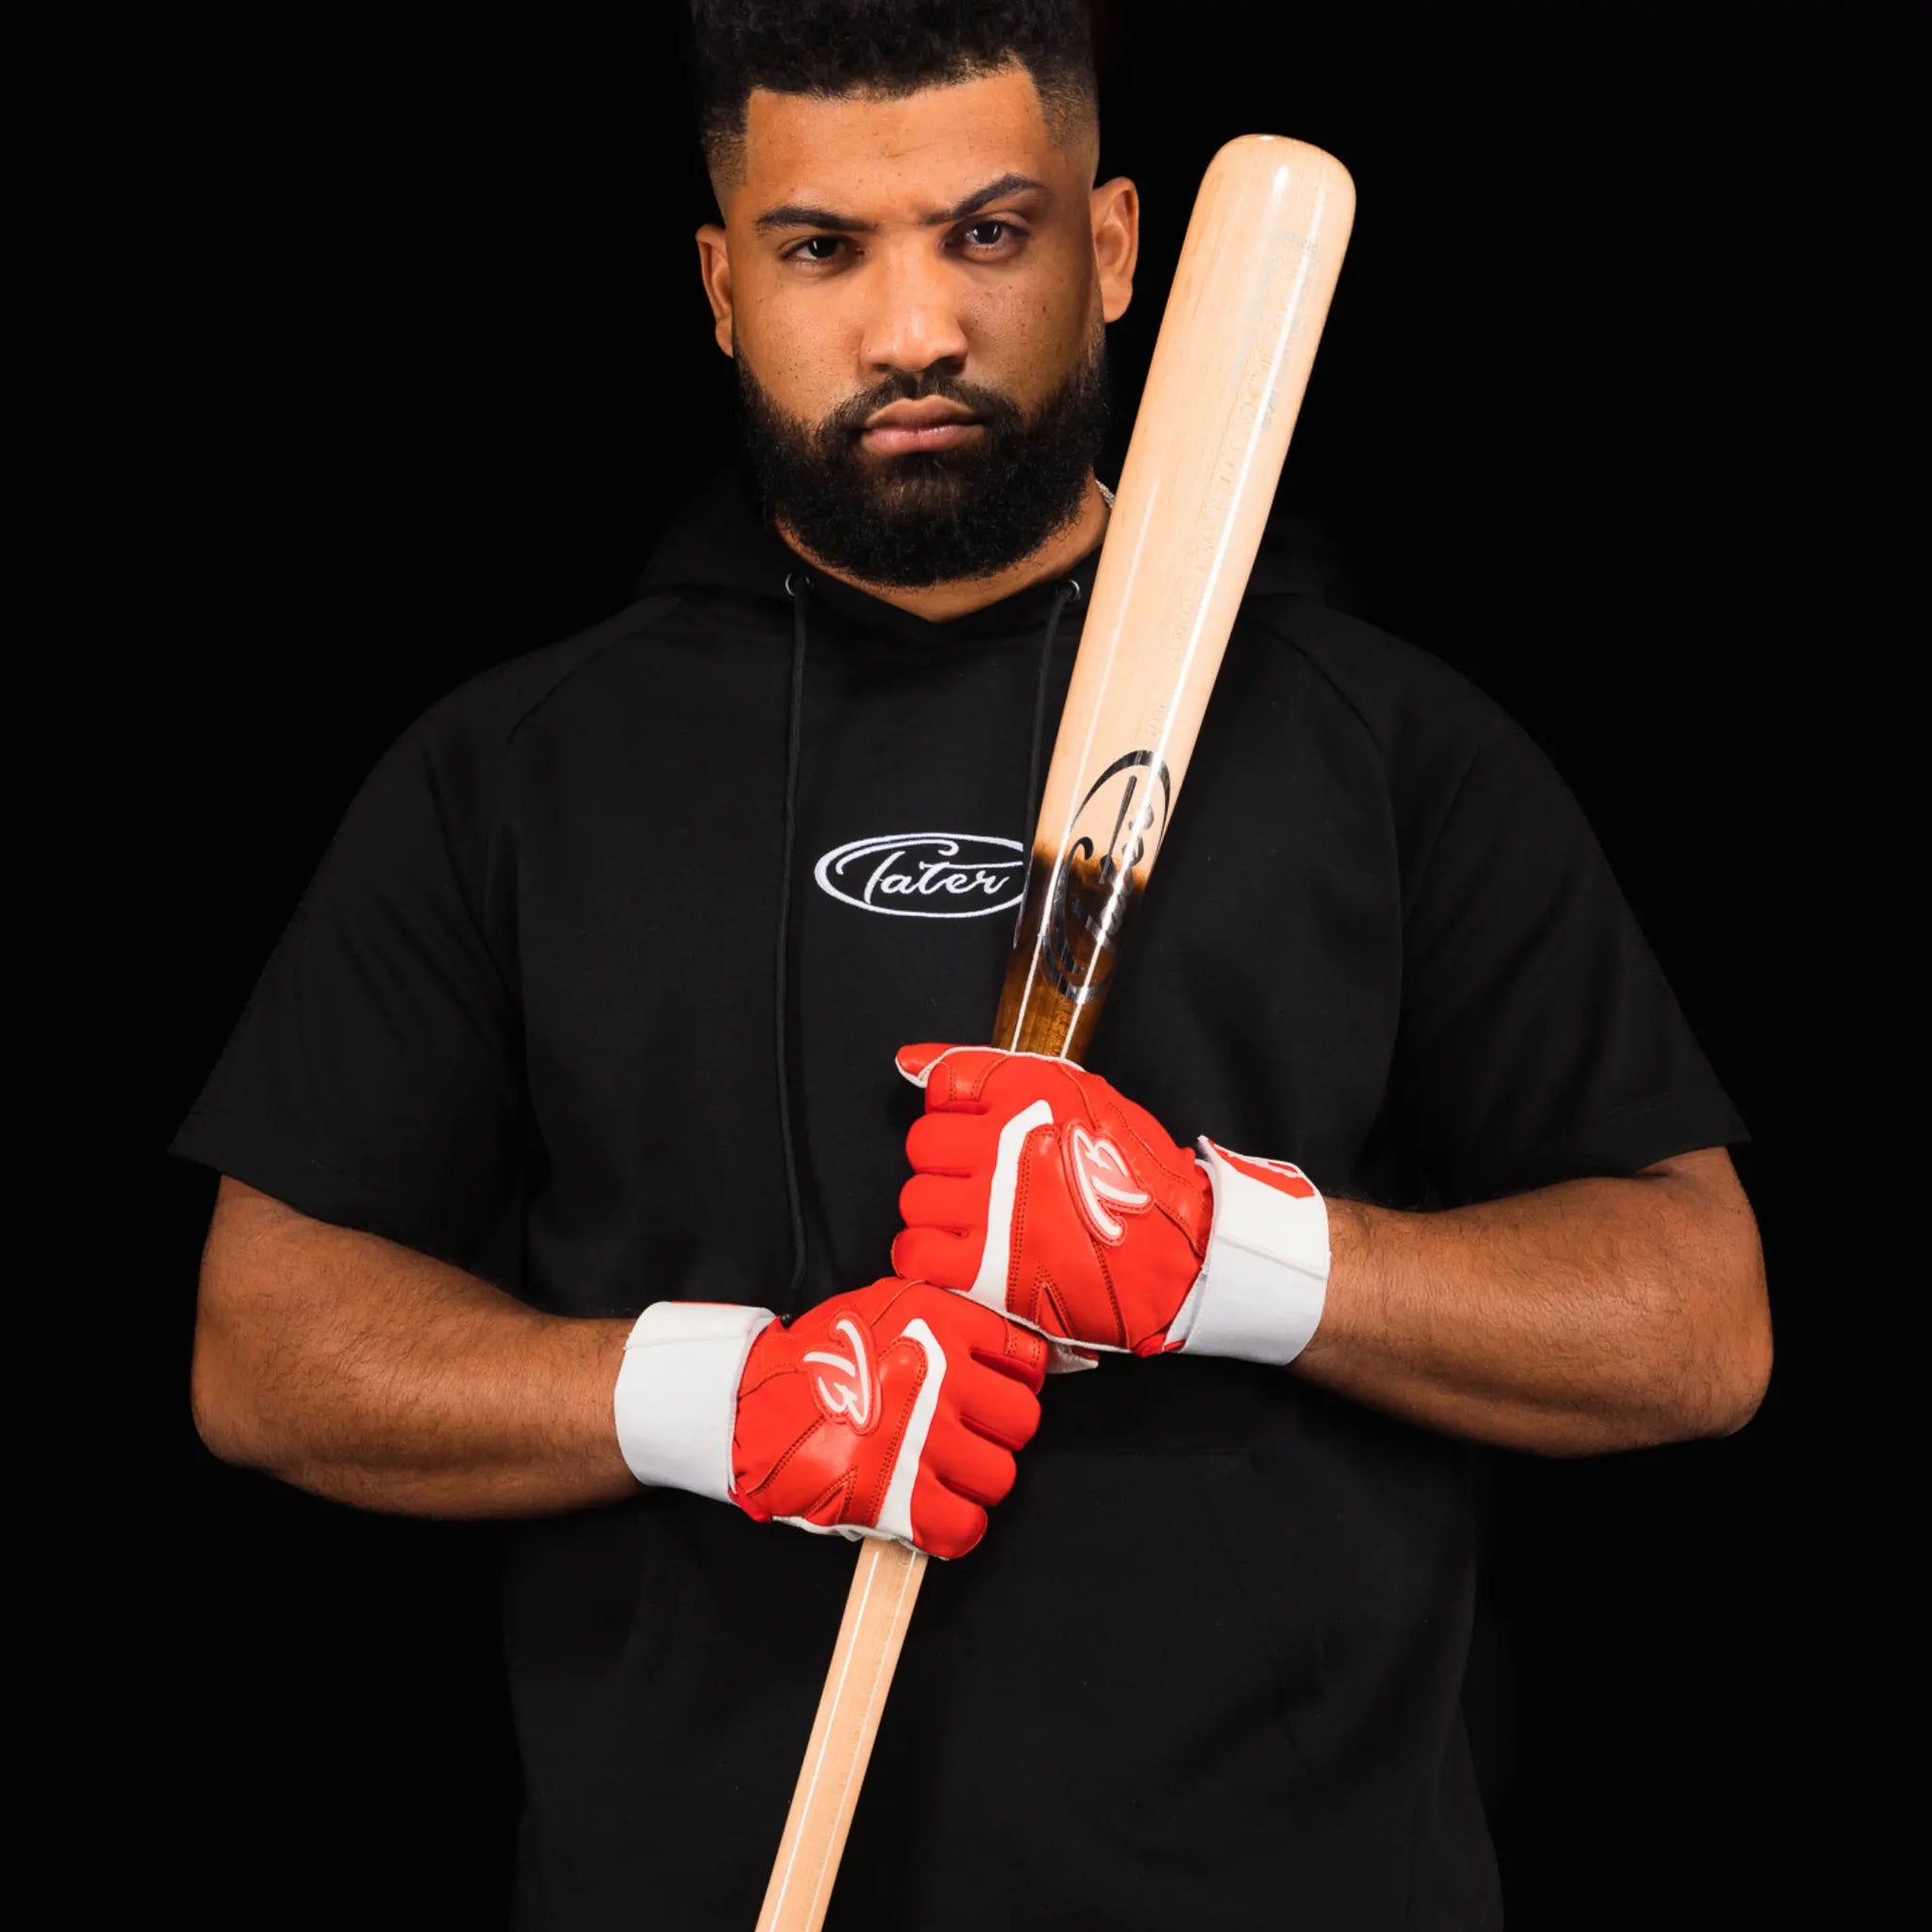 A high-quality wooden baseball bat with a dark brown pine tar grip, showcasing the Tater Baseball logo near the handle.This image features two Tater X12 Pro Maple baseball bats in a crossed position against a clear background. The top bat is displayed with the handle towards us, showing off the smooth pine tar finish, while the bottom bat presents the barrel with the brand's logo clearly visible, suggesting a bat well-suited for high school players due to its balance and craftsmanship.